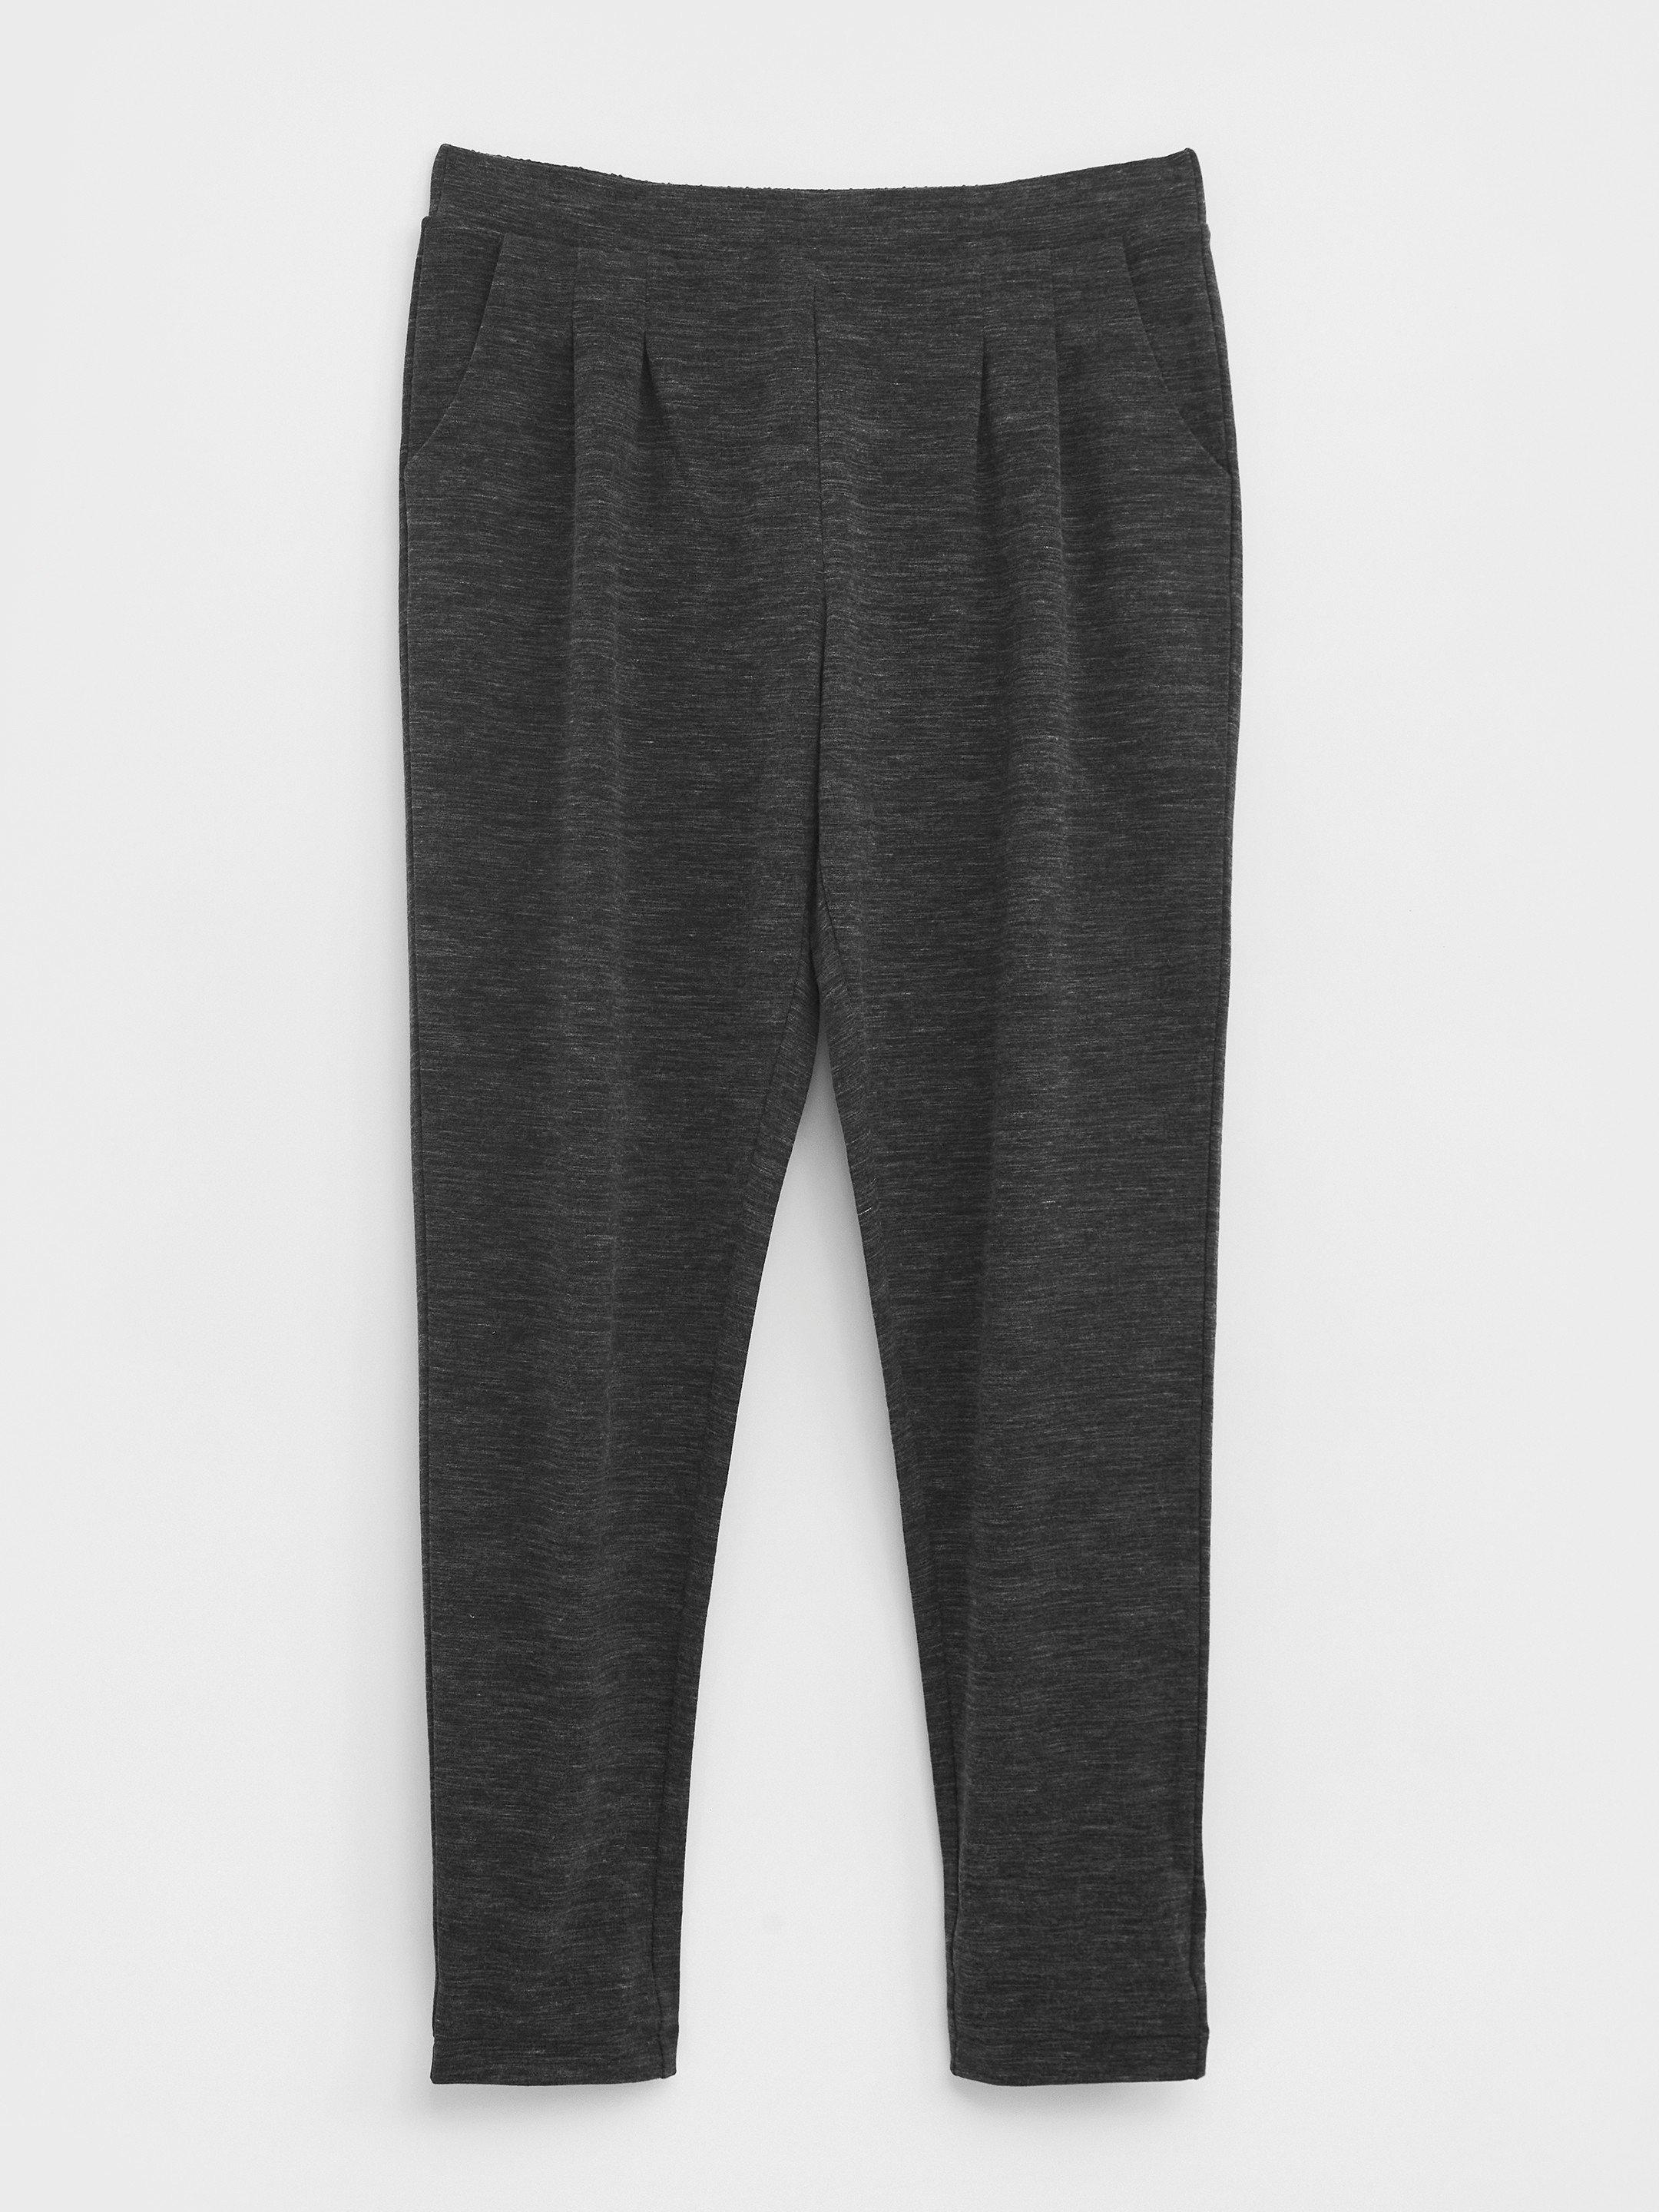 Maison Jogger in CHARC GREY - FLAT FRONT